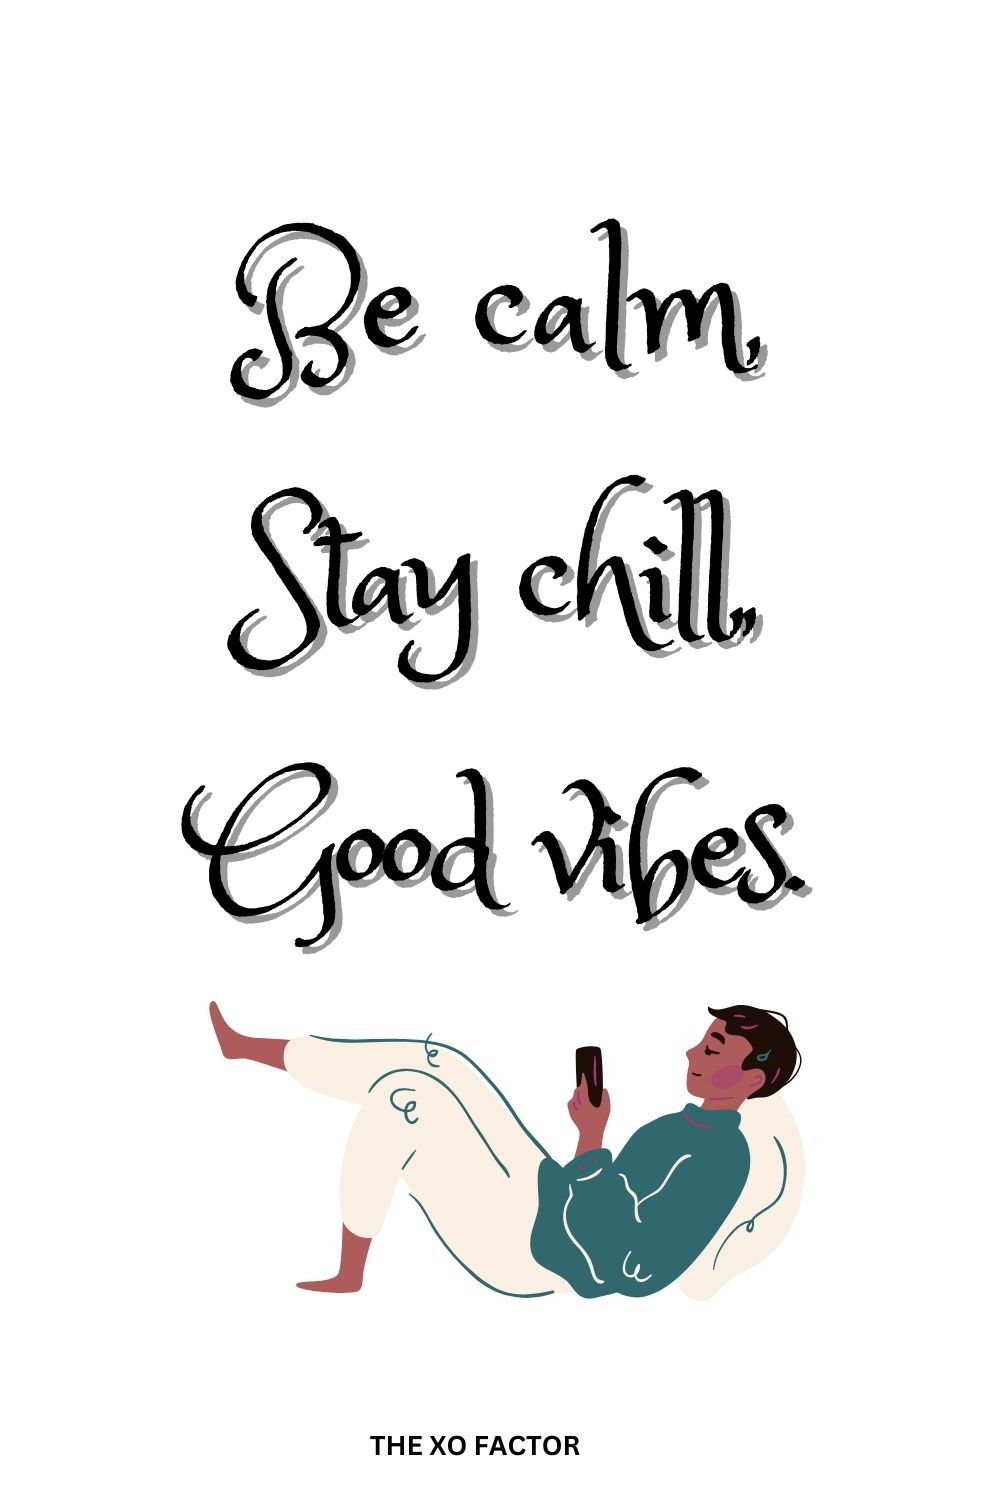 Be calm. Stay chill. Good vibes